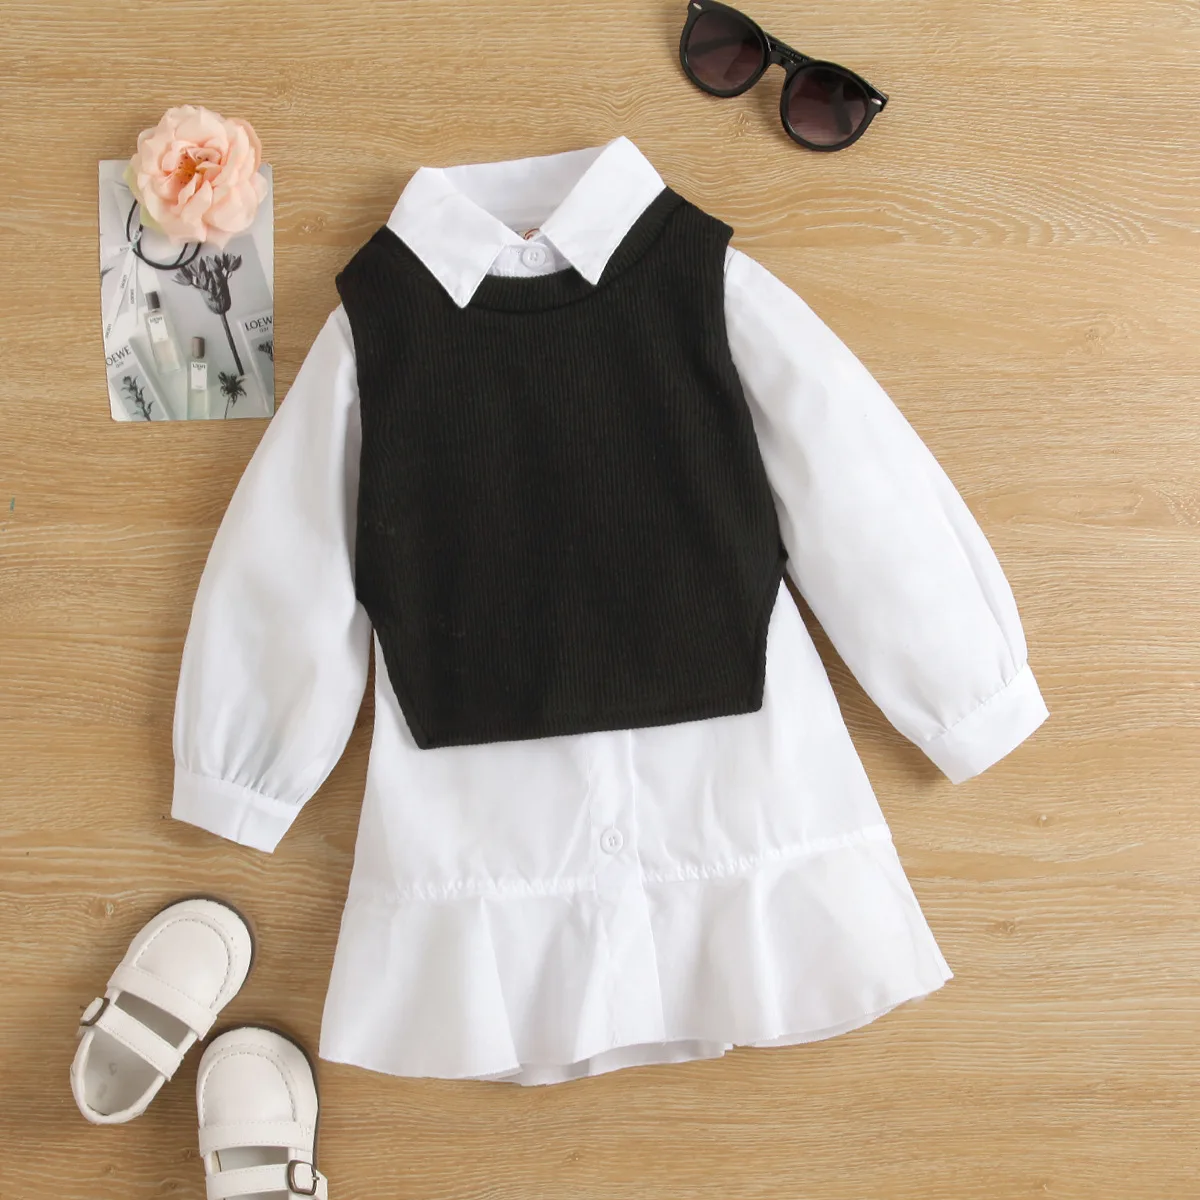 2023 Spring Girls Clothing Boutique Long-sleeved Ruffled T-Shirt Dress Blouse Knitted Vest 2pcs Baby Clothing Sets